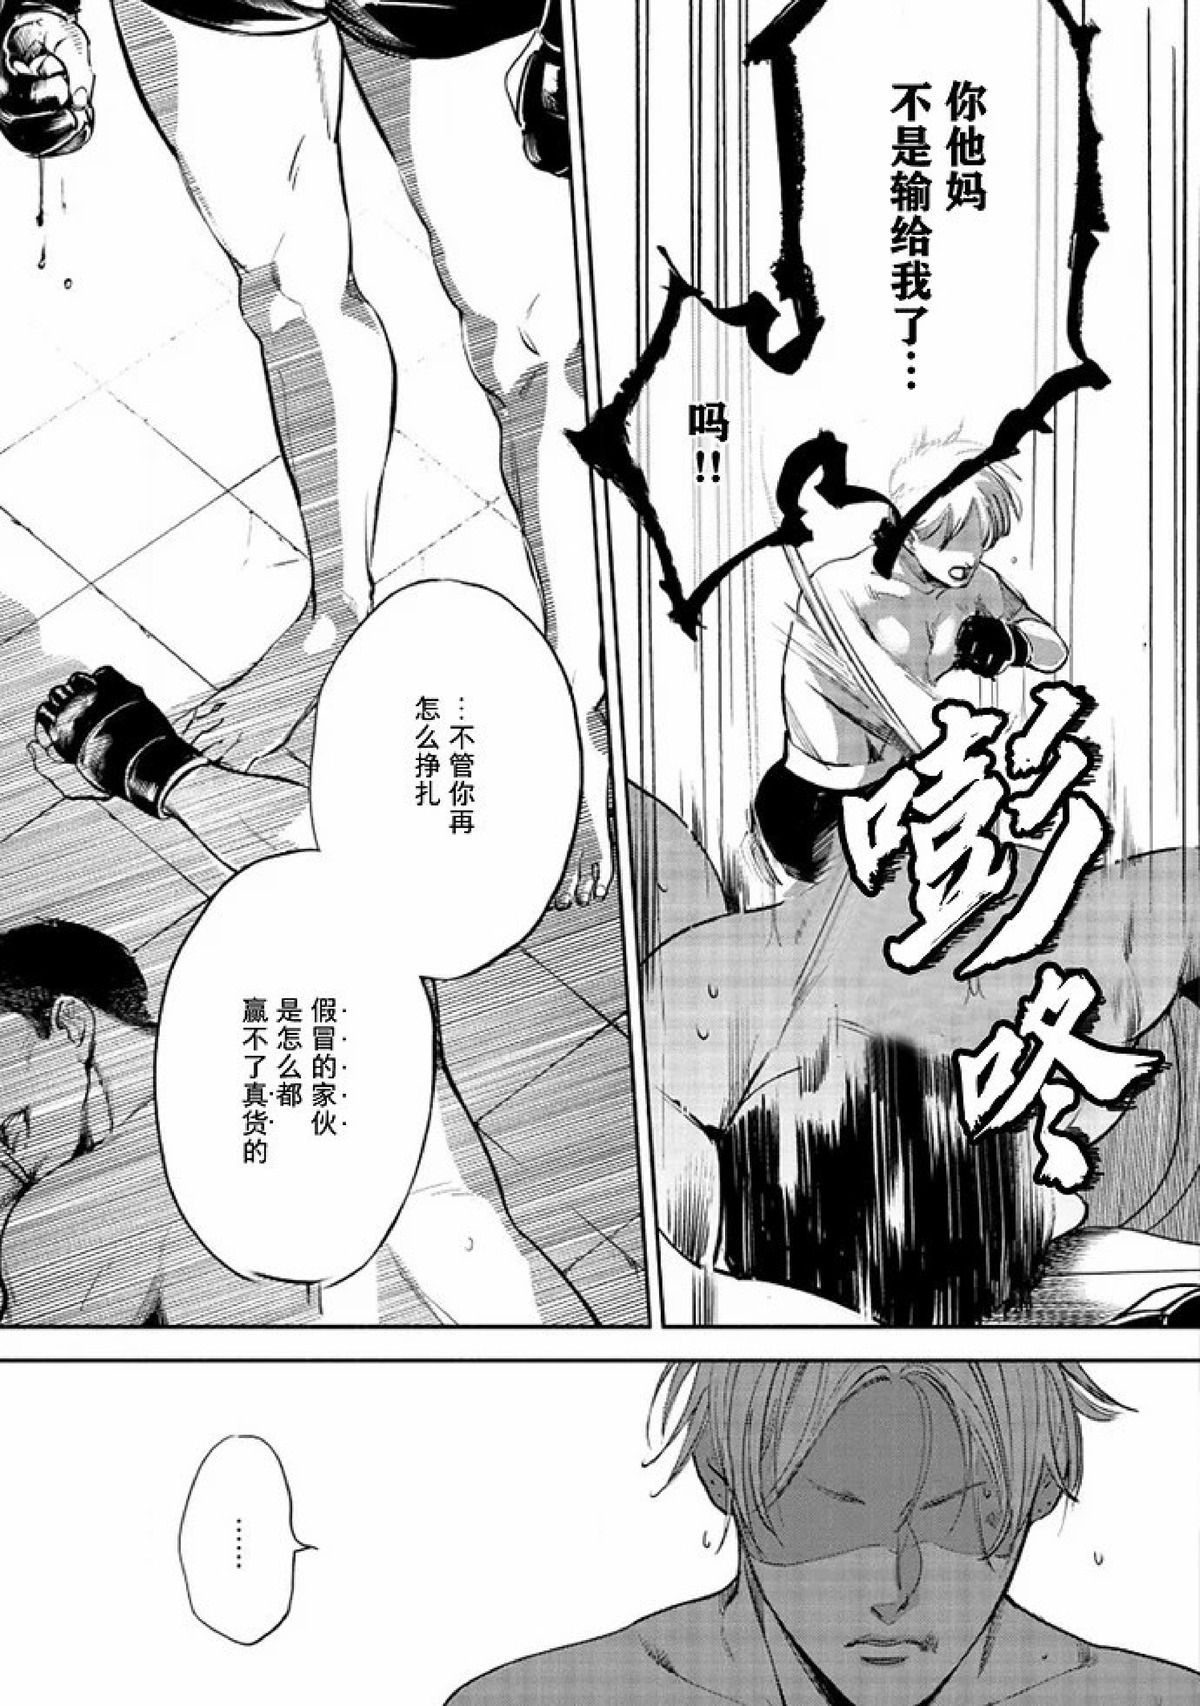 【Two sides of the same coin[耽美]】漫画-（上卷01-02）章节漫画下拉式图片-71.jpg